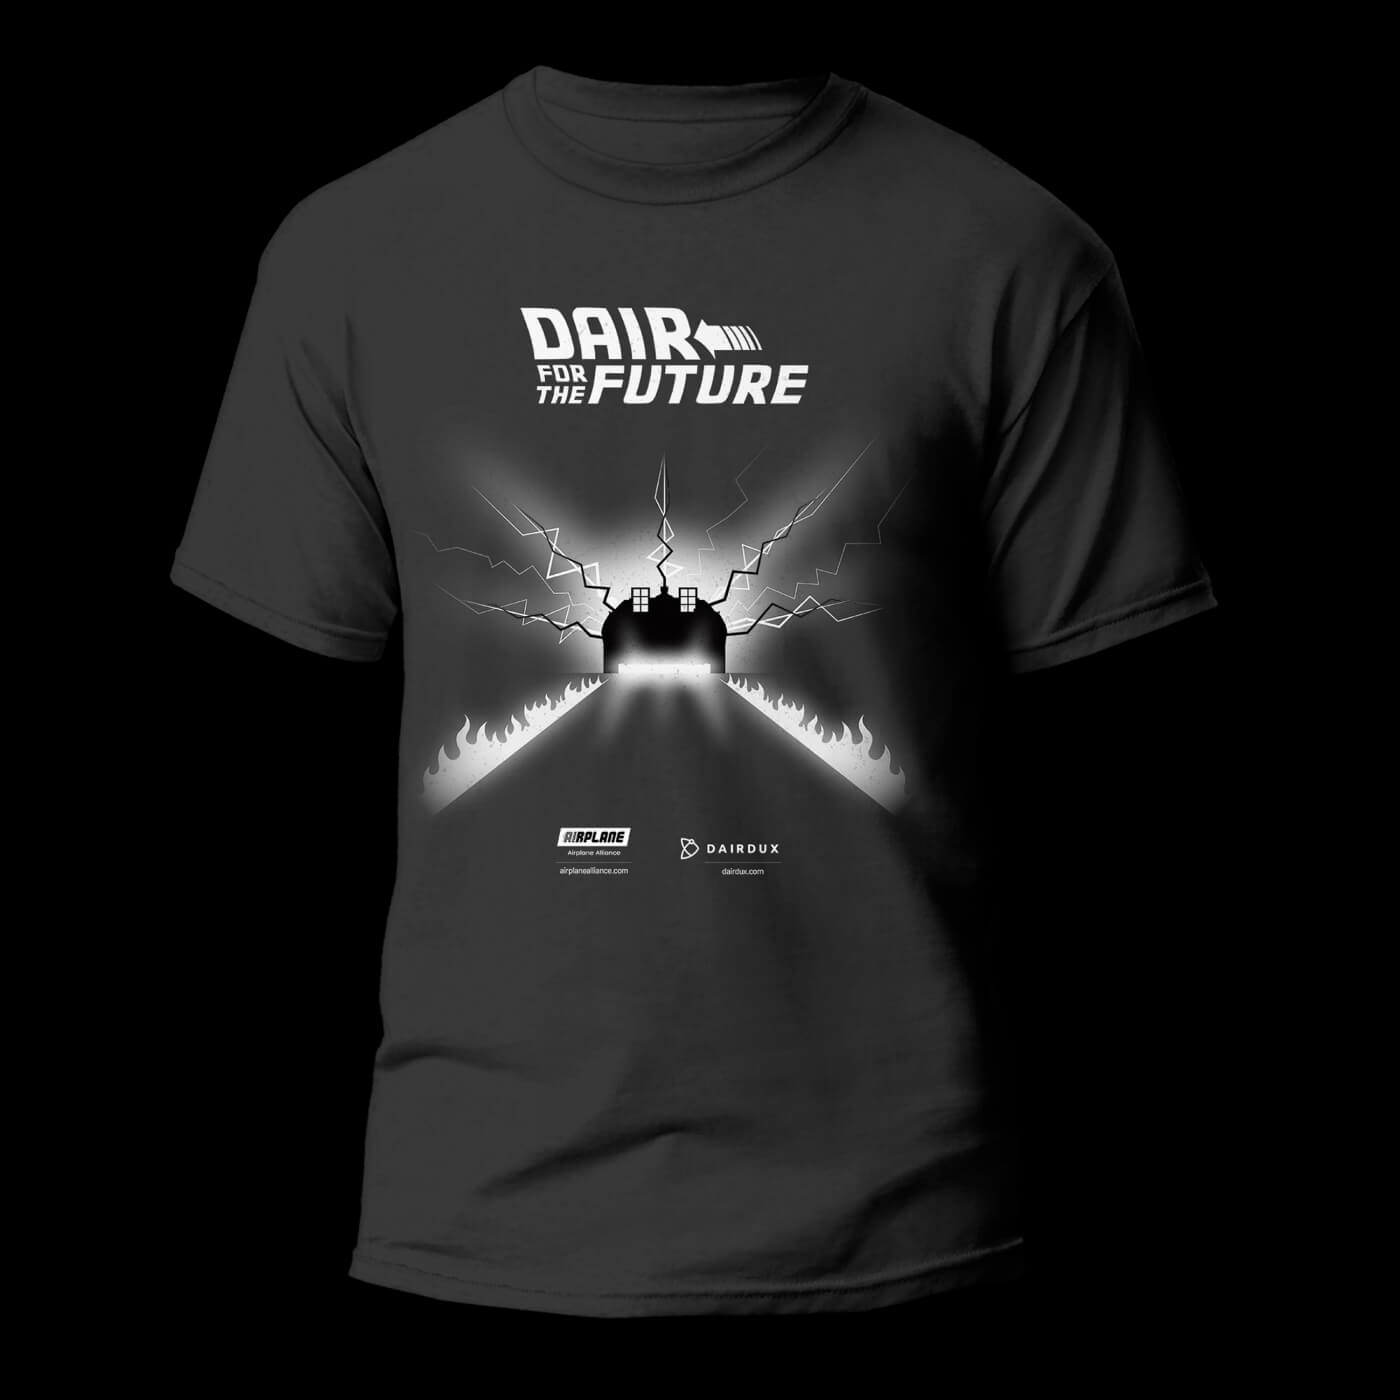 back-to-the-future-dairdux-t-shirt-mockup